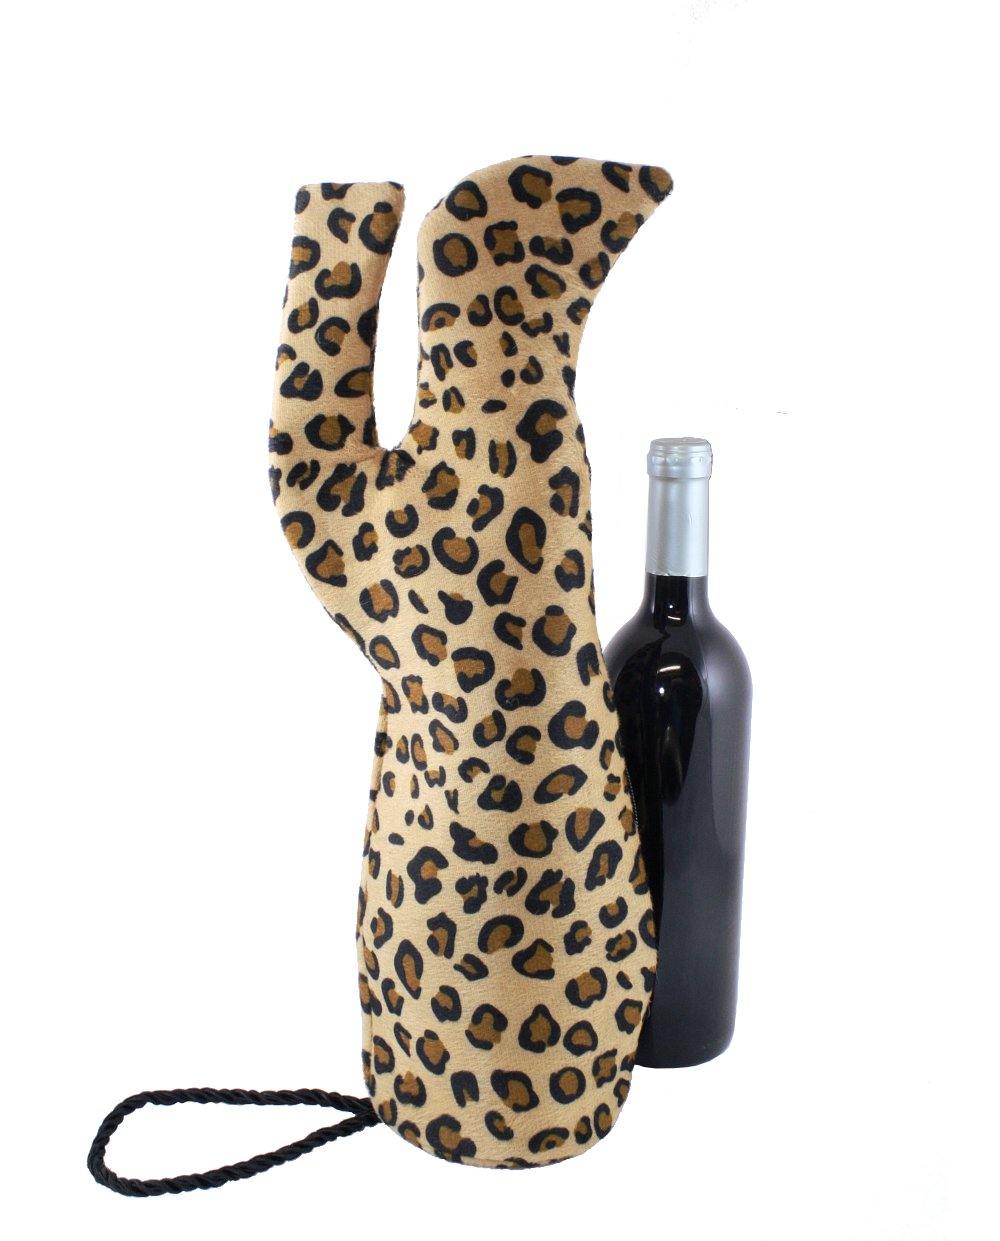 Stiletto Wine Bag in Cheetah Print - Tipsy Totes | Wine Gifts | Beer Koozies | Wine Totes | Simply Fabulous